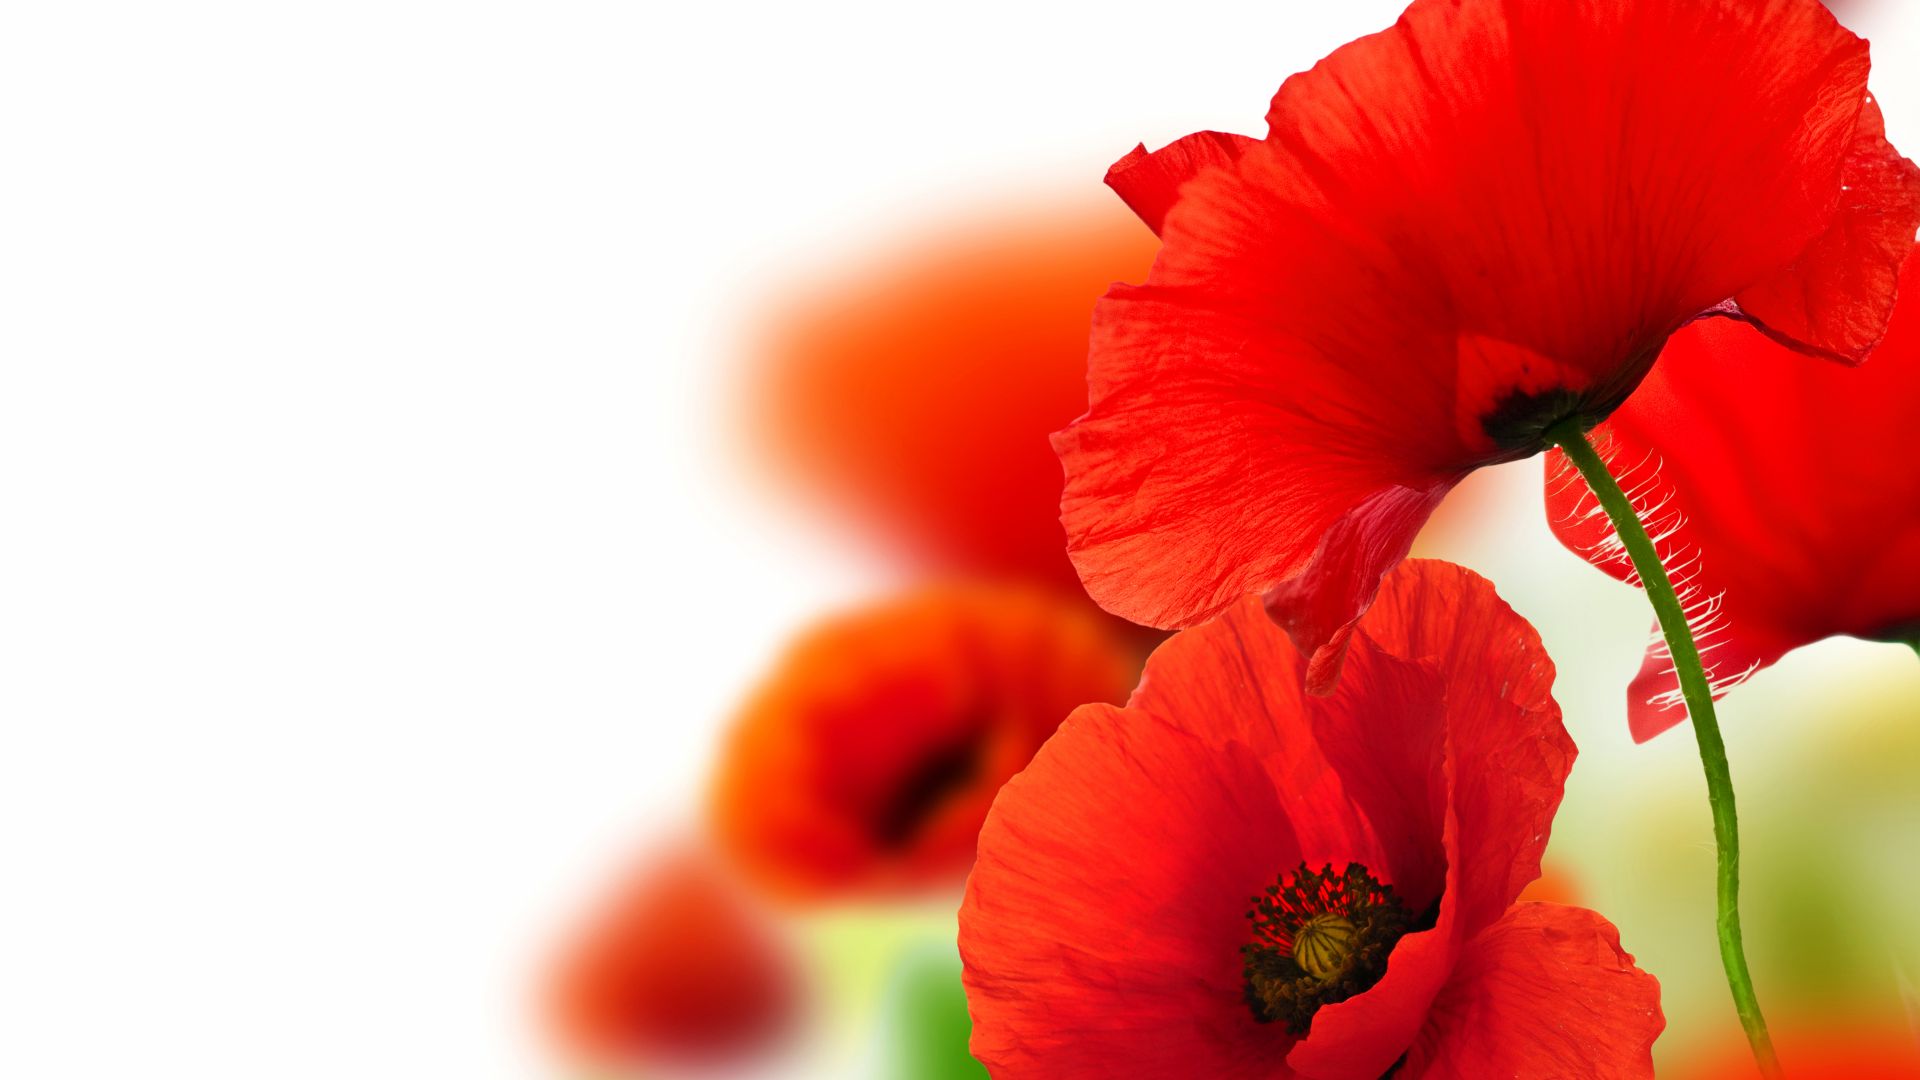 Desktop Wallpaper Red Poppy Flower Close Up Hd Image Picture